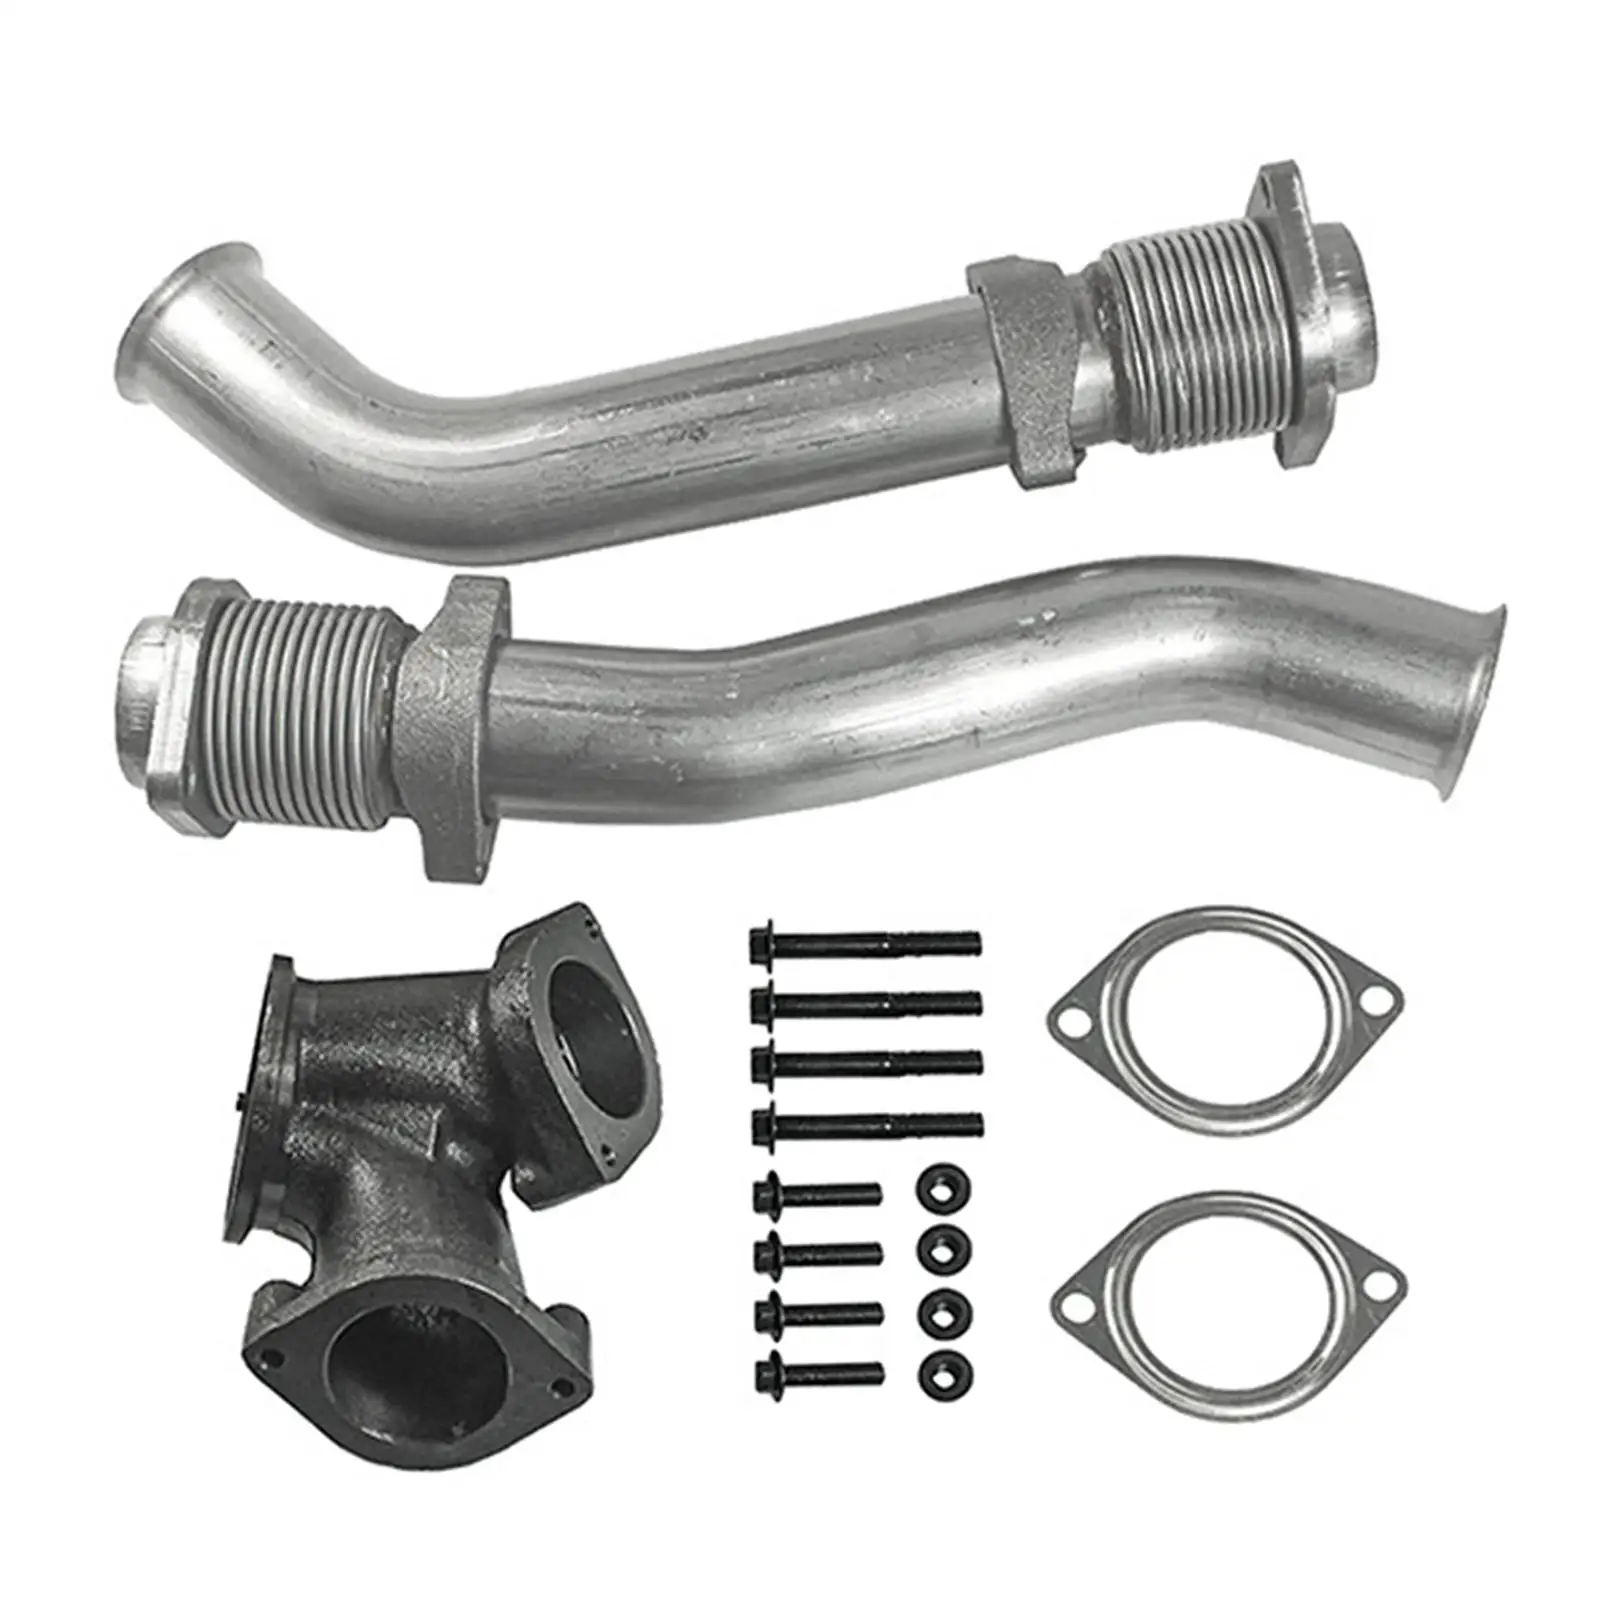 Turbocharger up Pipe Kit Diesel Turbine Pipe Kit 679005 F4TZ6K854C Assembly Car Accessories for F250 F350  Professional Durable